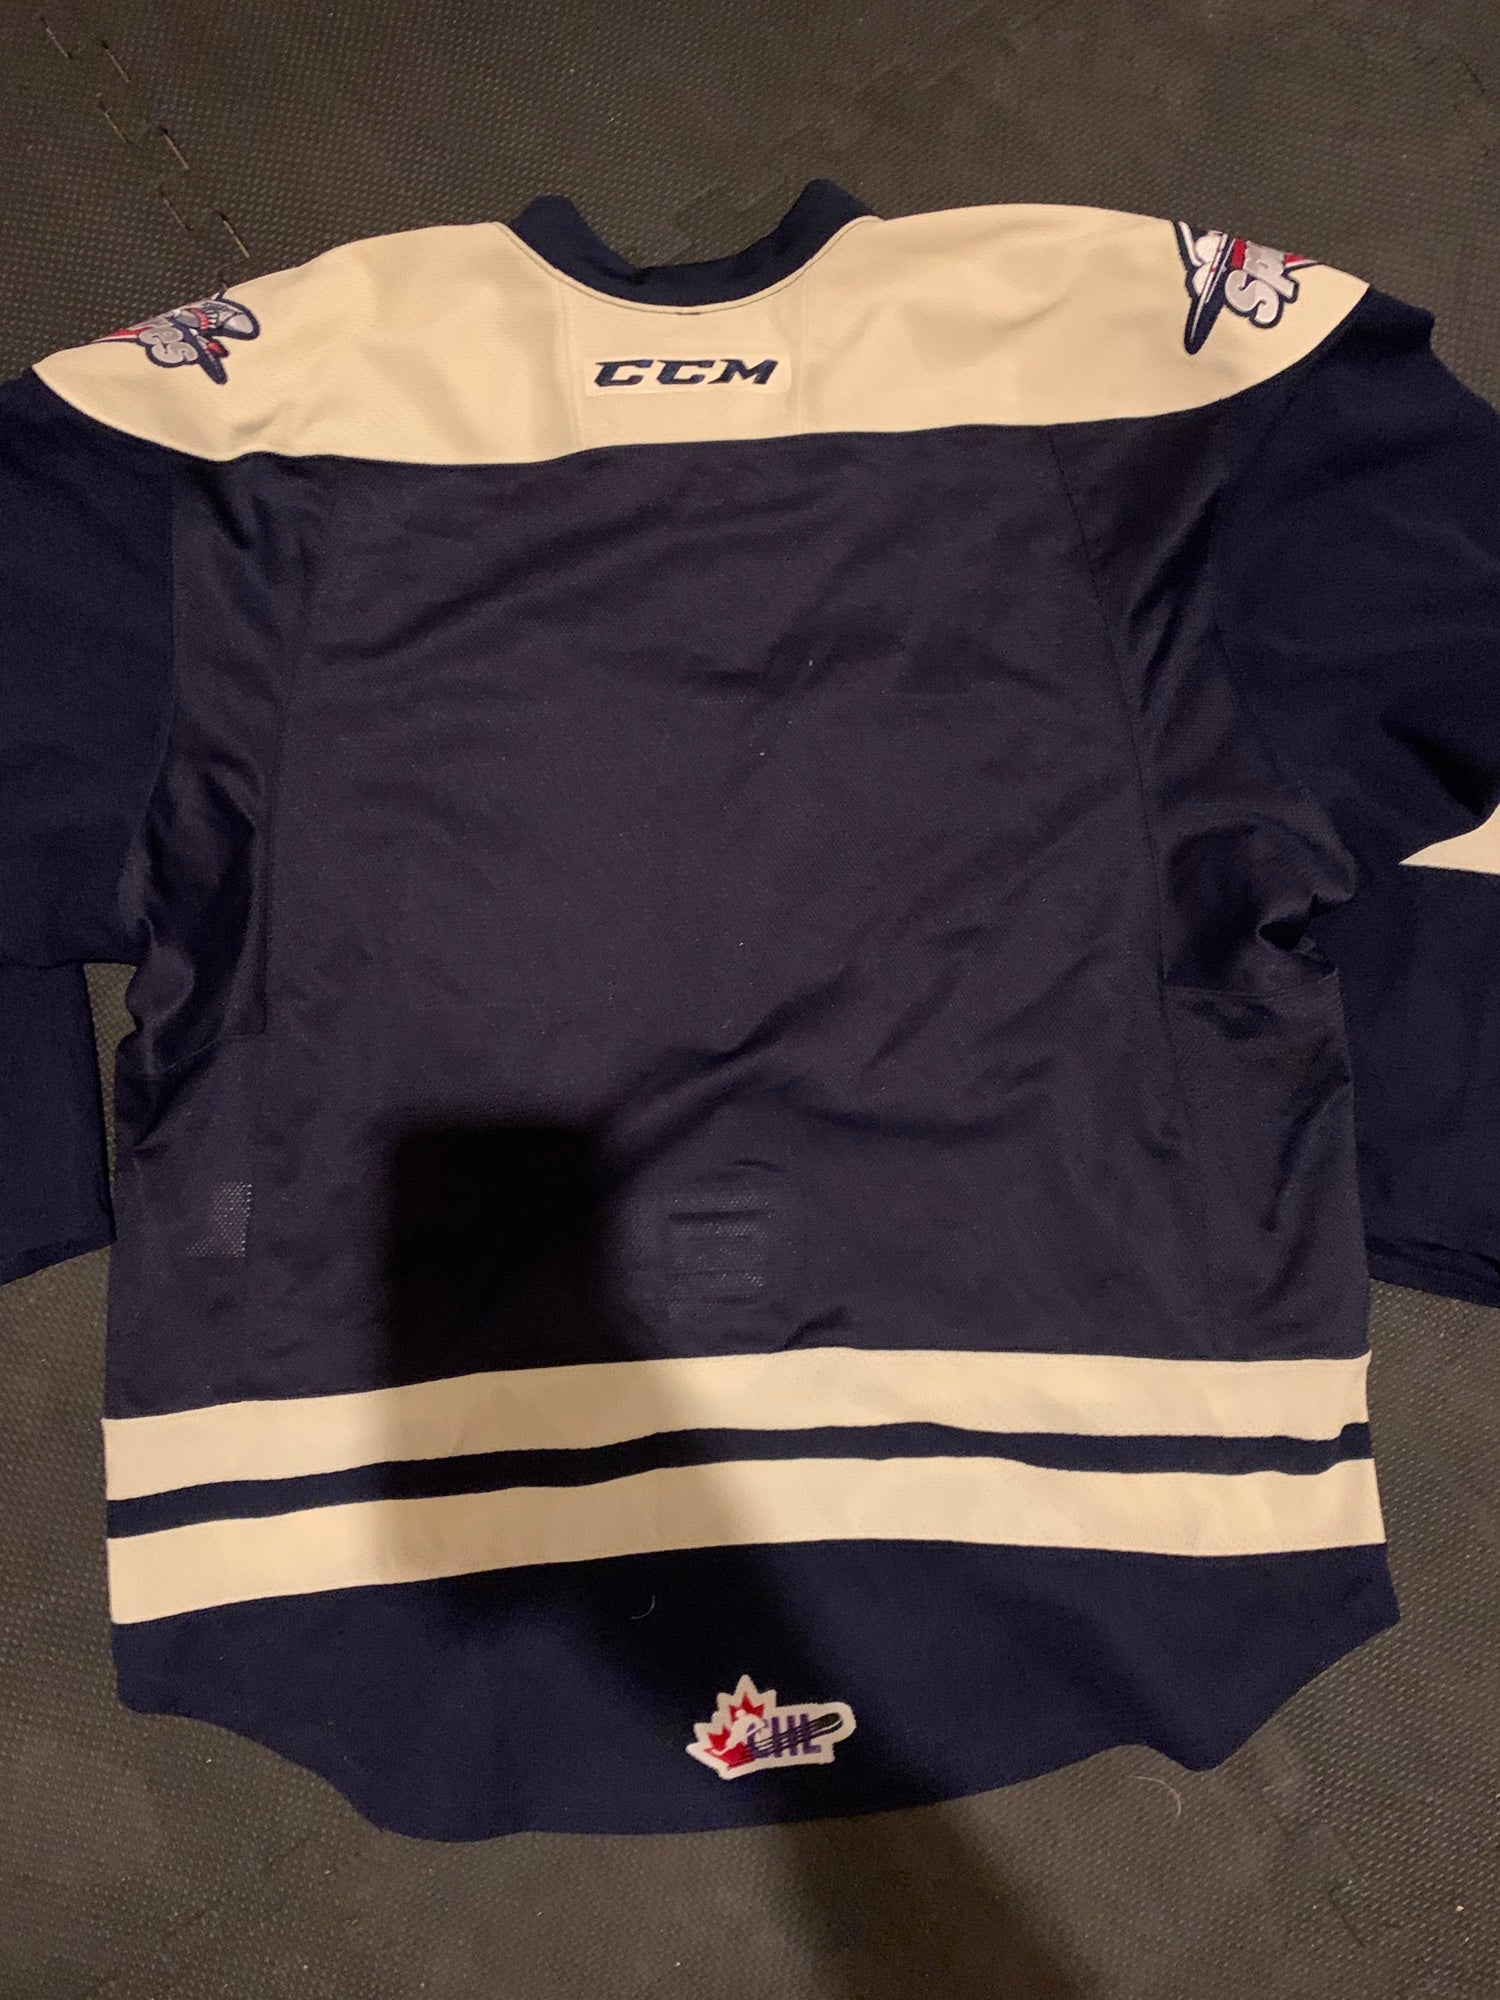 Windsor Spitfires Commemorative Jerseys Available Online - In Play